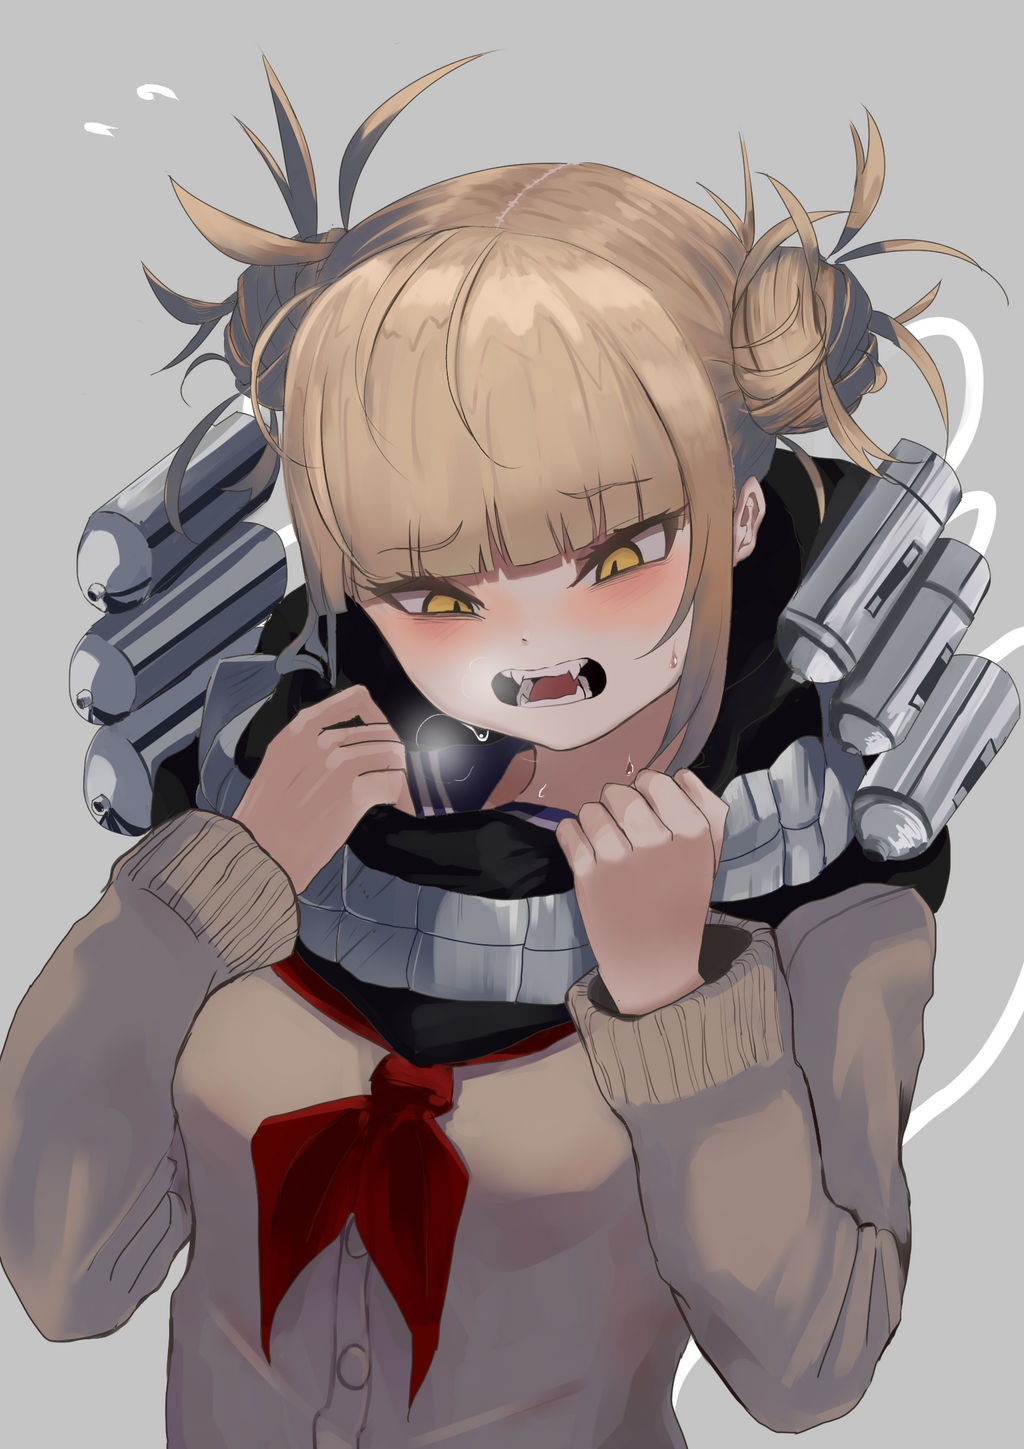 himiko toga by zx623723 on DeviantArt